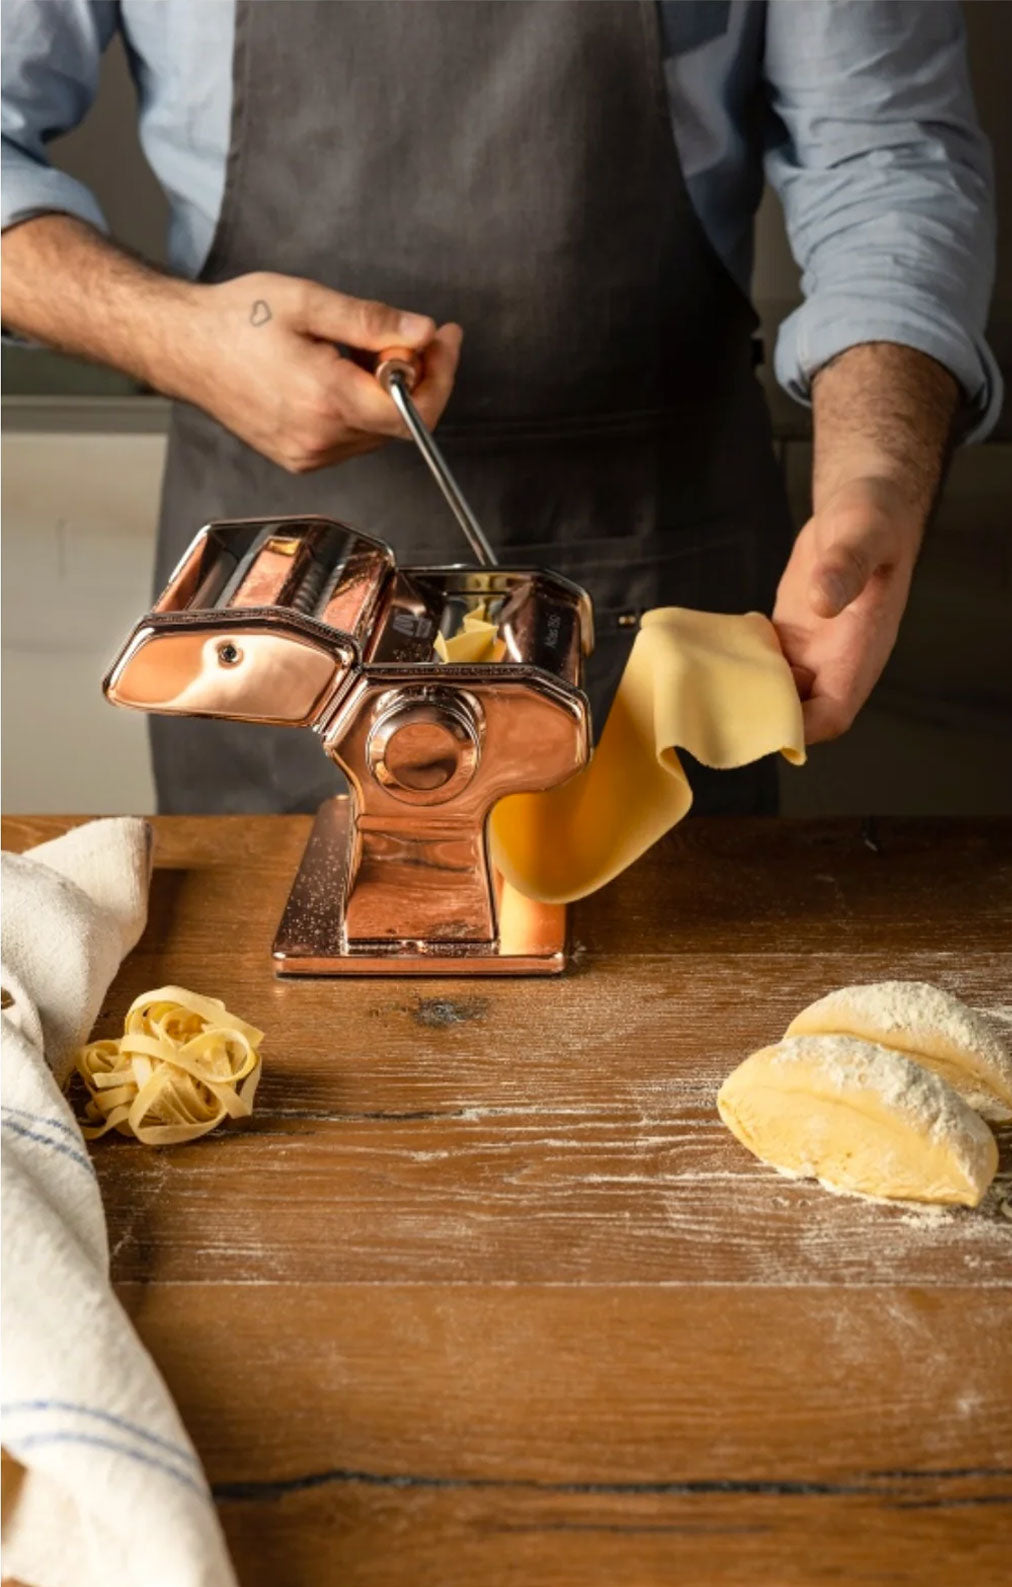 A man is making pasta with a pasta maker.